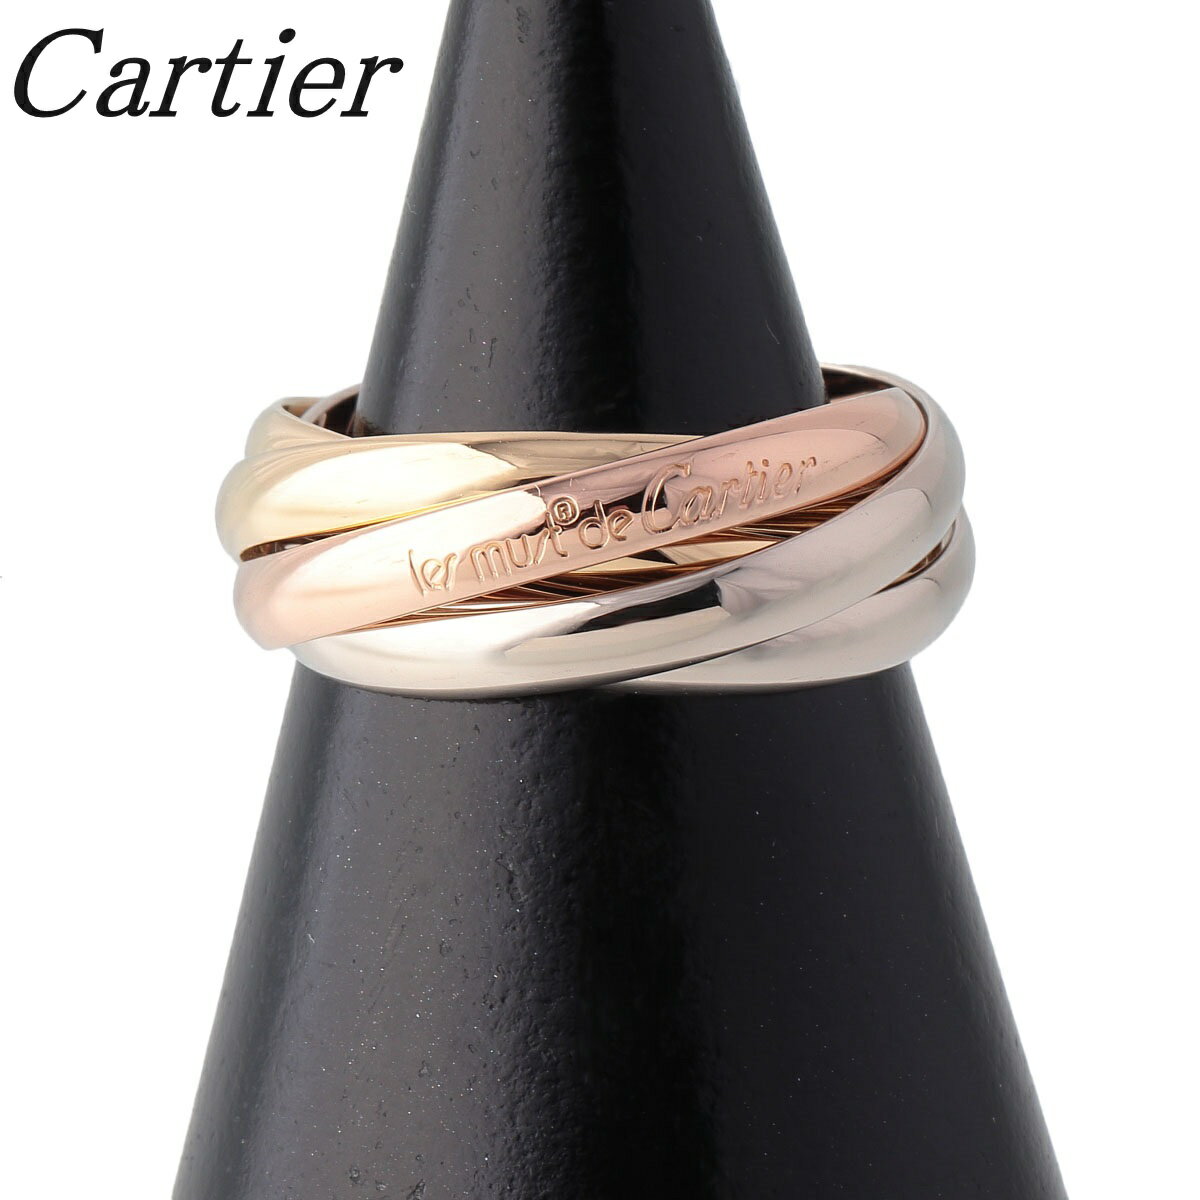 <strong>カルティエ</strong> トリニティ リング 5連 #<strong>54</strong> 750 スリーカラー 新品仕上げ済 Cartier【中古】16686